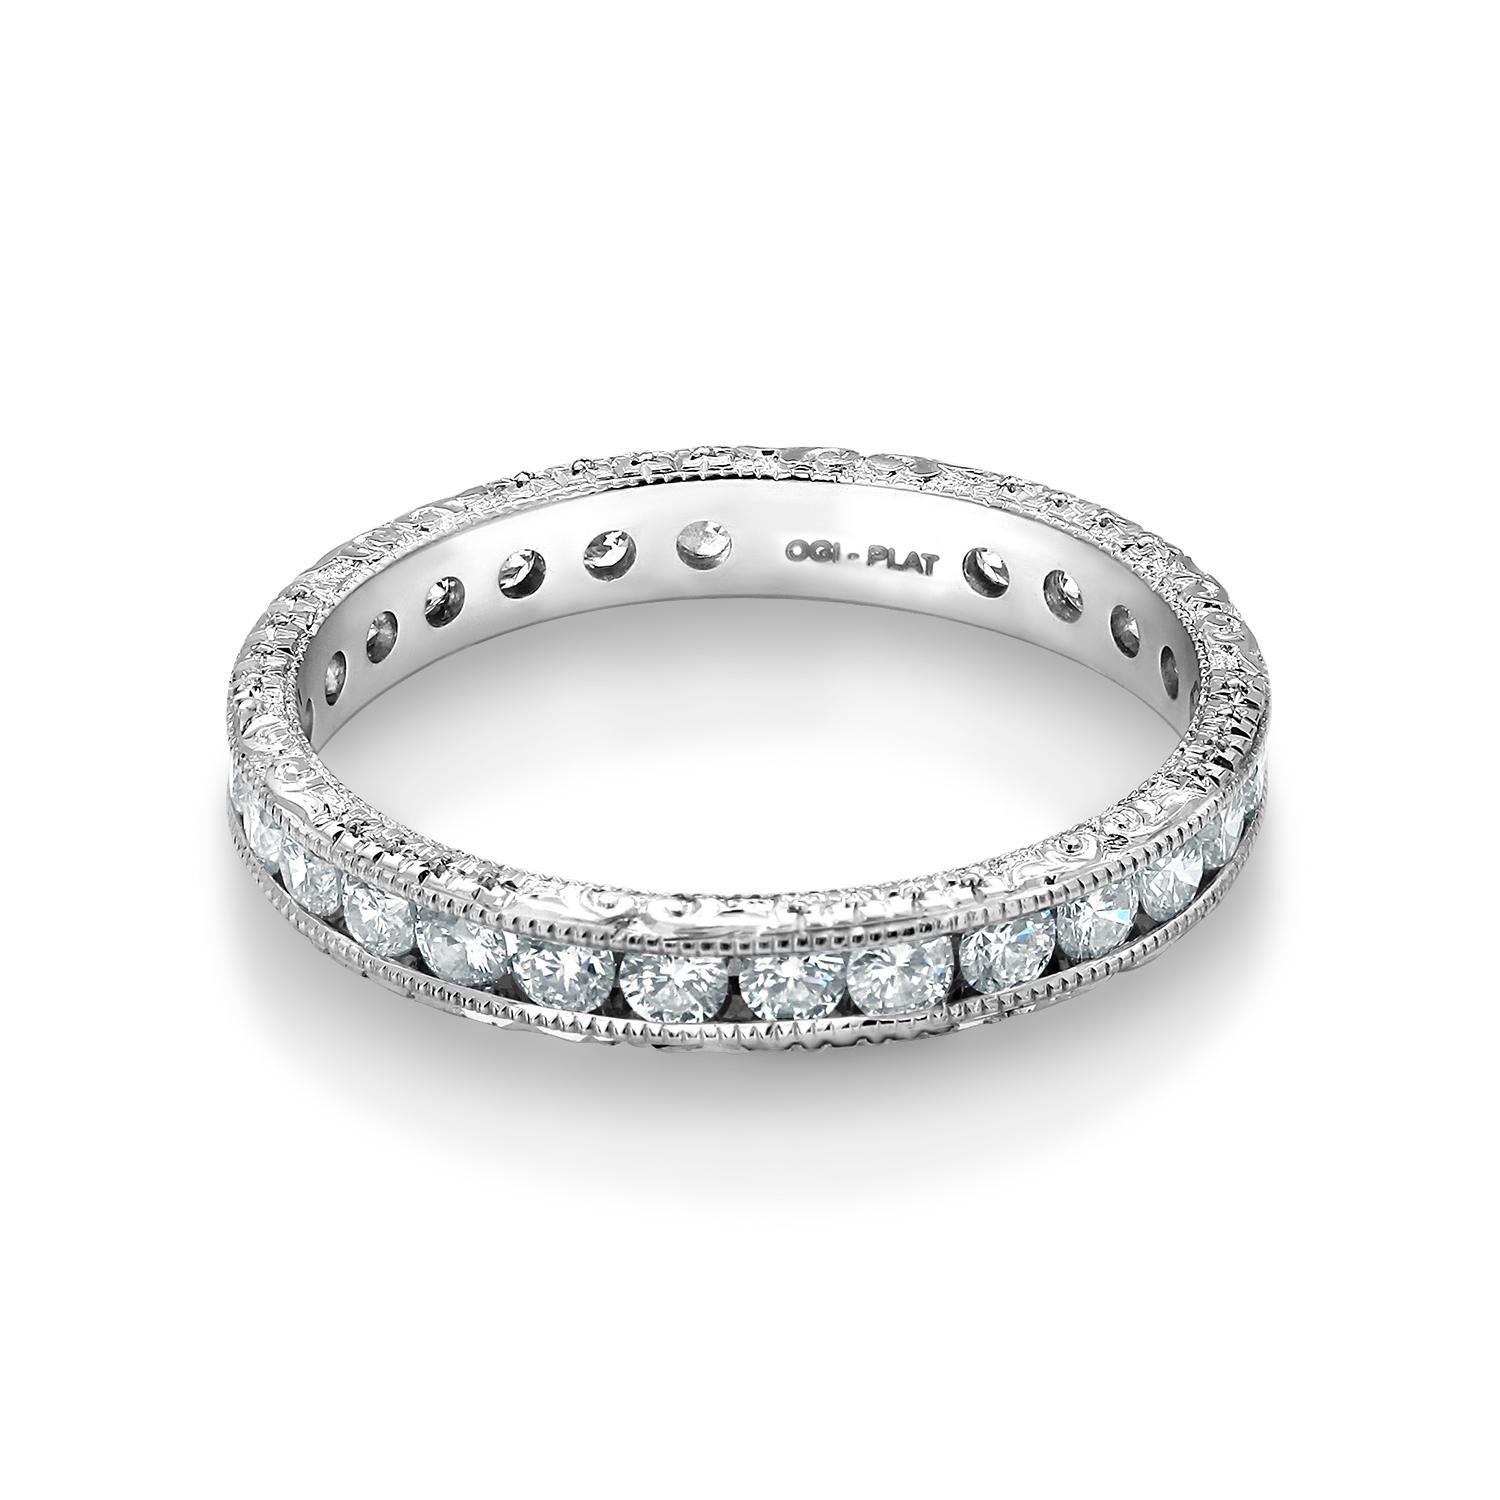 Women's Platinum Channel Set Diamond Eternity Band with Old Master Hand Engraving